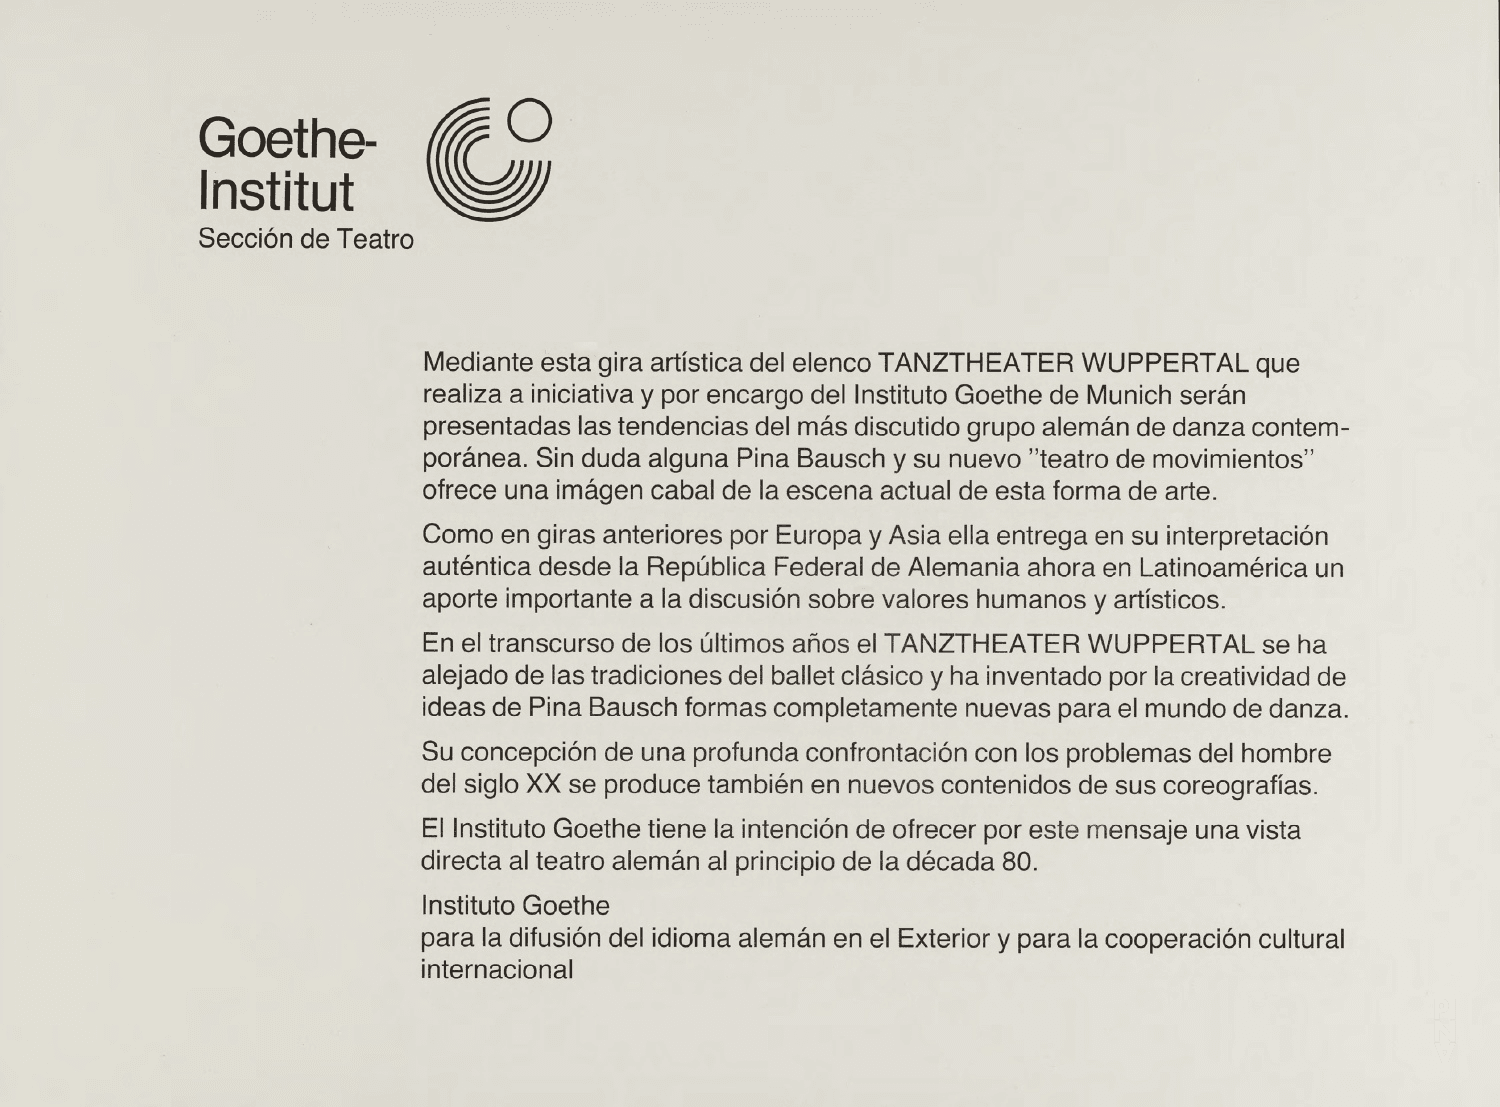 Insert for “Café Müller”, “Kontakthof”, “The Rite of Spring” and “The Second Spring” by Pina Bausch in in Caracas, 08/09/1980 – 08/10/1980